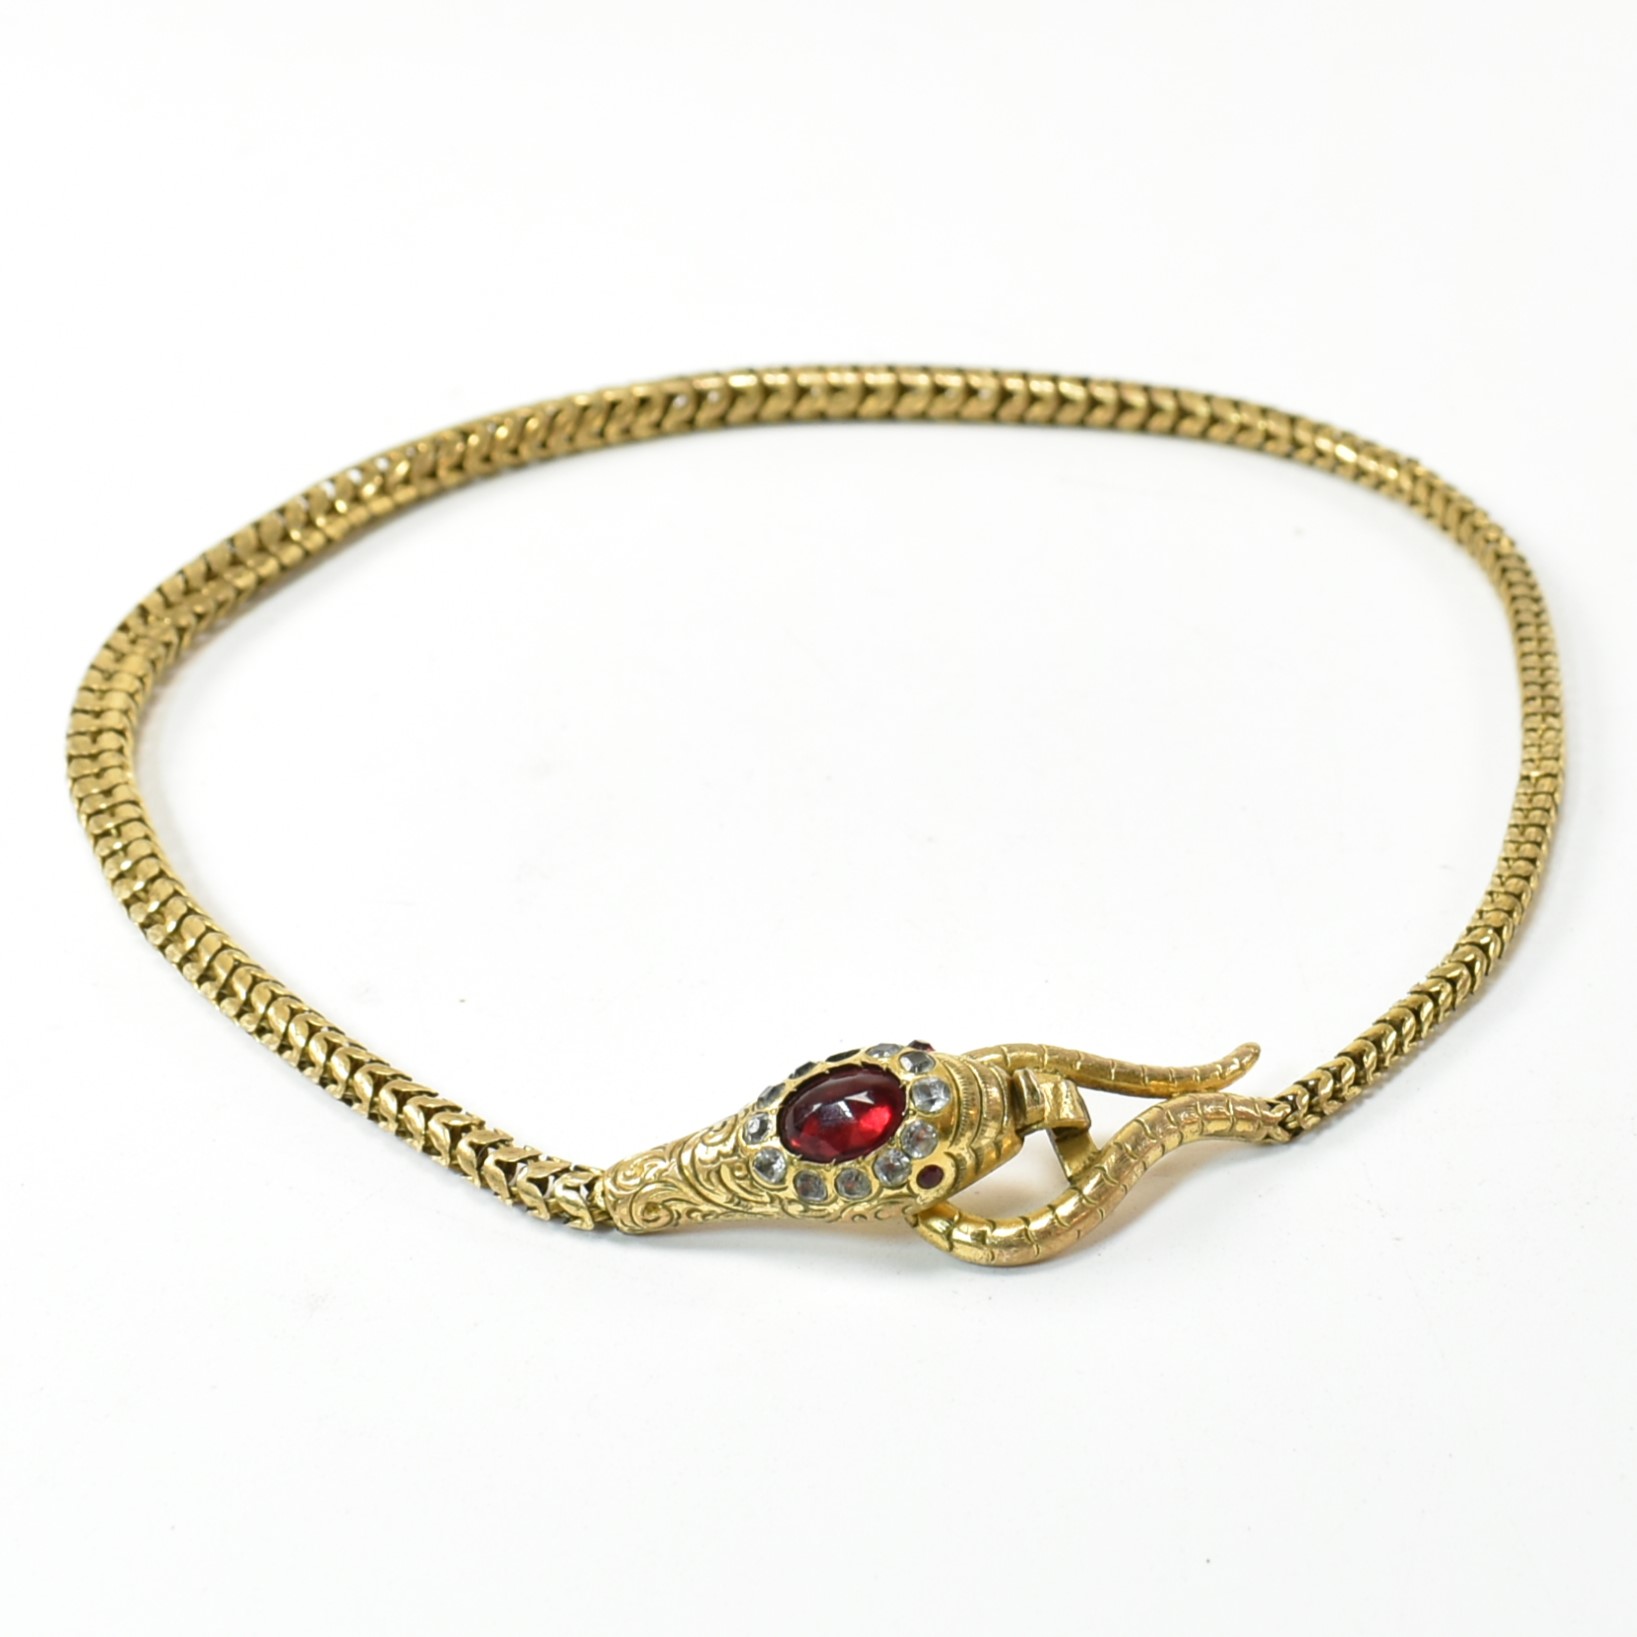 LATE VICTORIAN/EARLY EDWARDIAN GILT METAL & PASTE SNAKE NECKLACE - Image 3 of 11